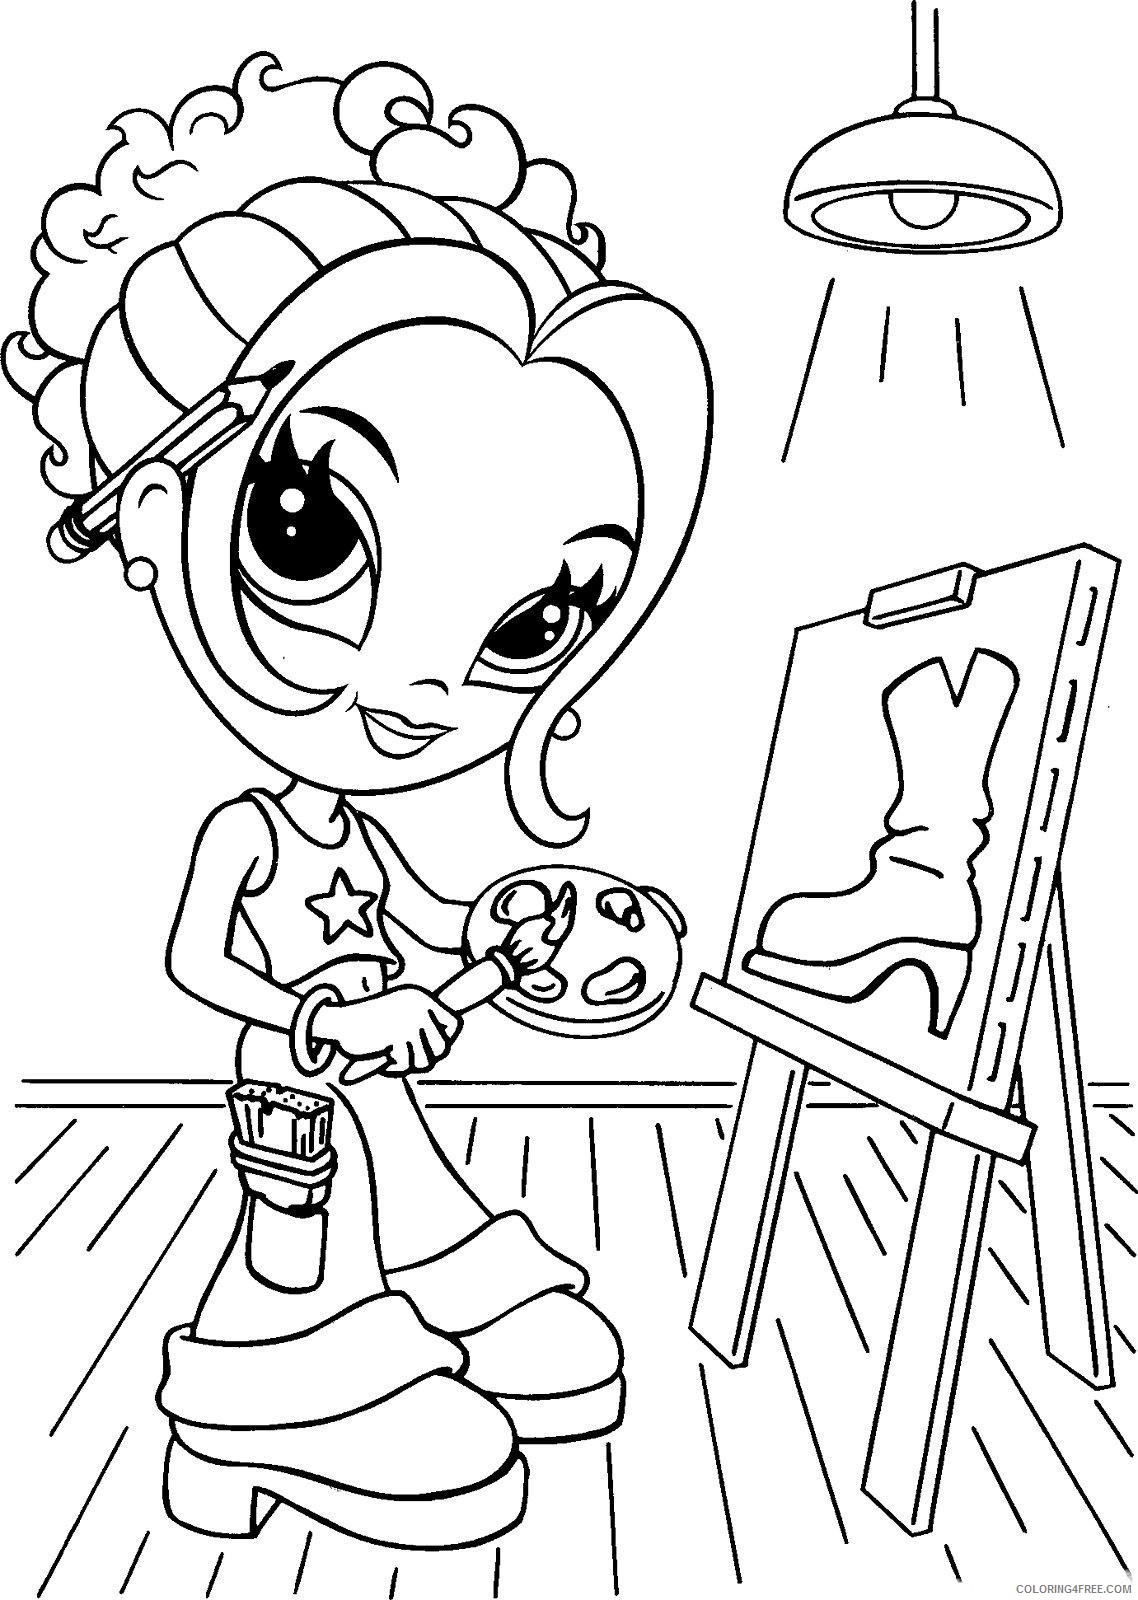 lisa frank coloring pages girl painting Coloring4free - Coloring4Free.com